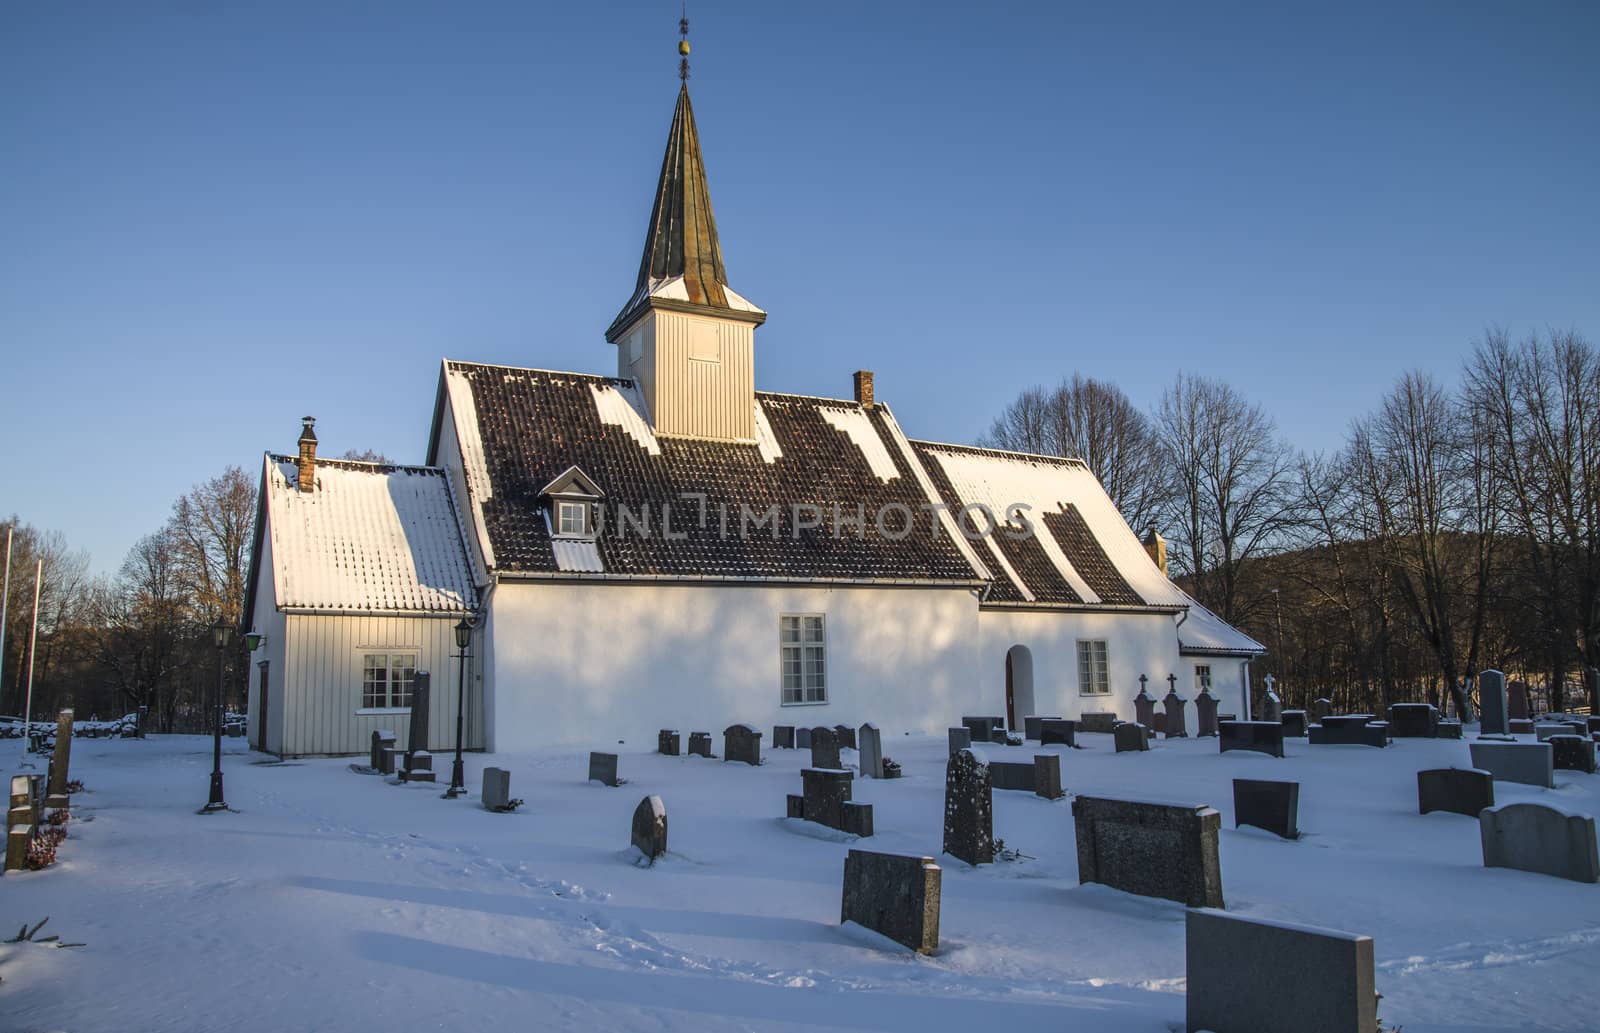 Idd church in winter, south by steirus